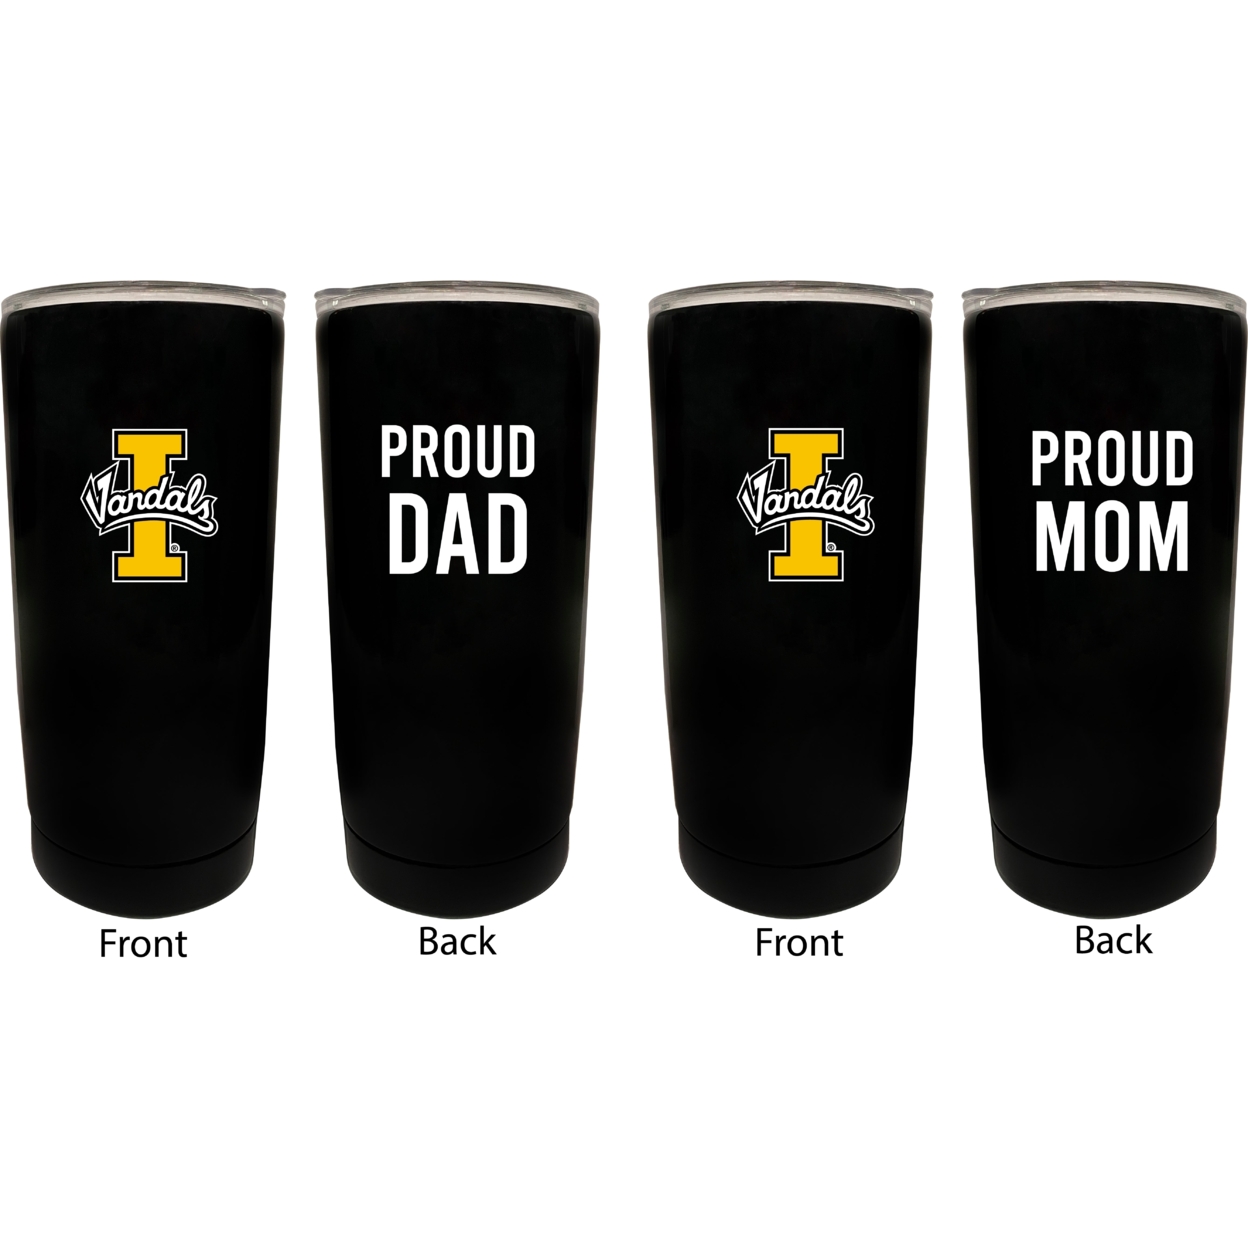 Idaho Vandals Proud Mom And Dad 16 Oz Insulated Stainless Steel Tumblers 2 Pack Black.